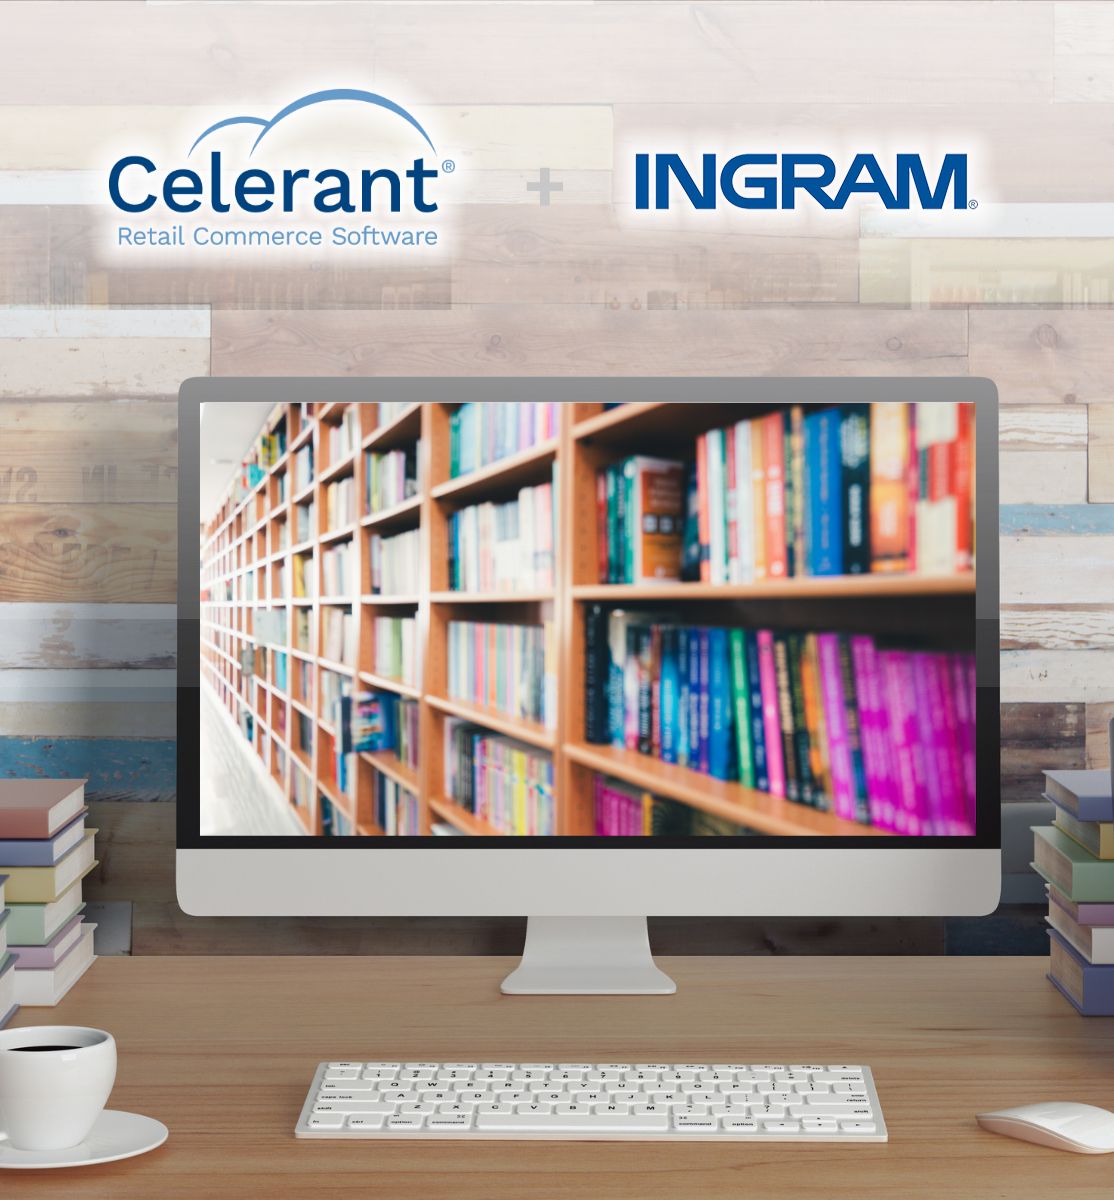 Offer an 'Endless Aisle' of Ingram's Products on your eCommerce